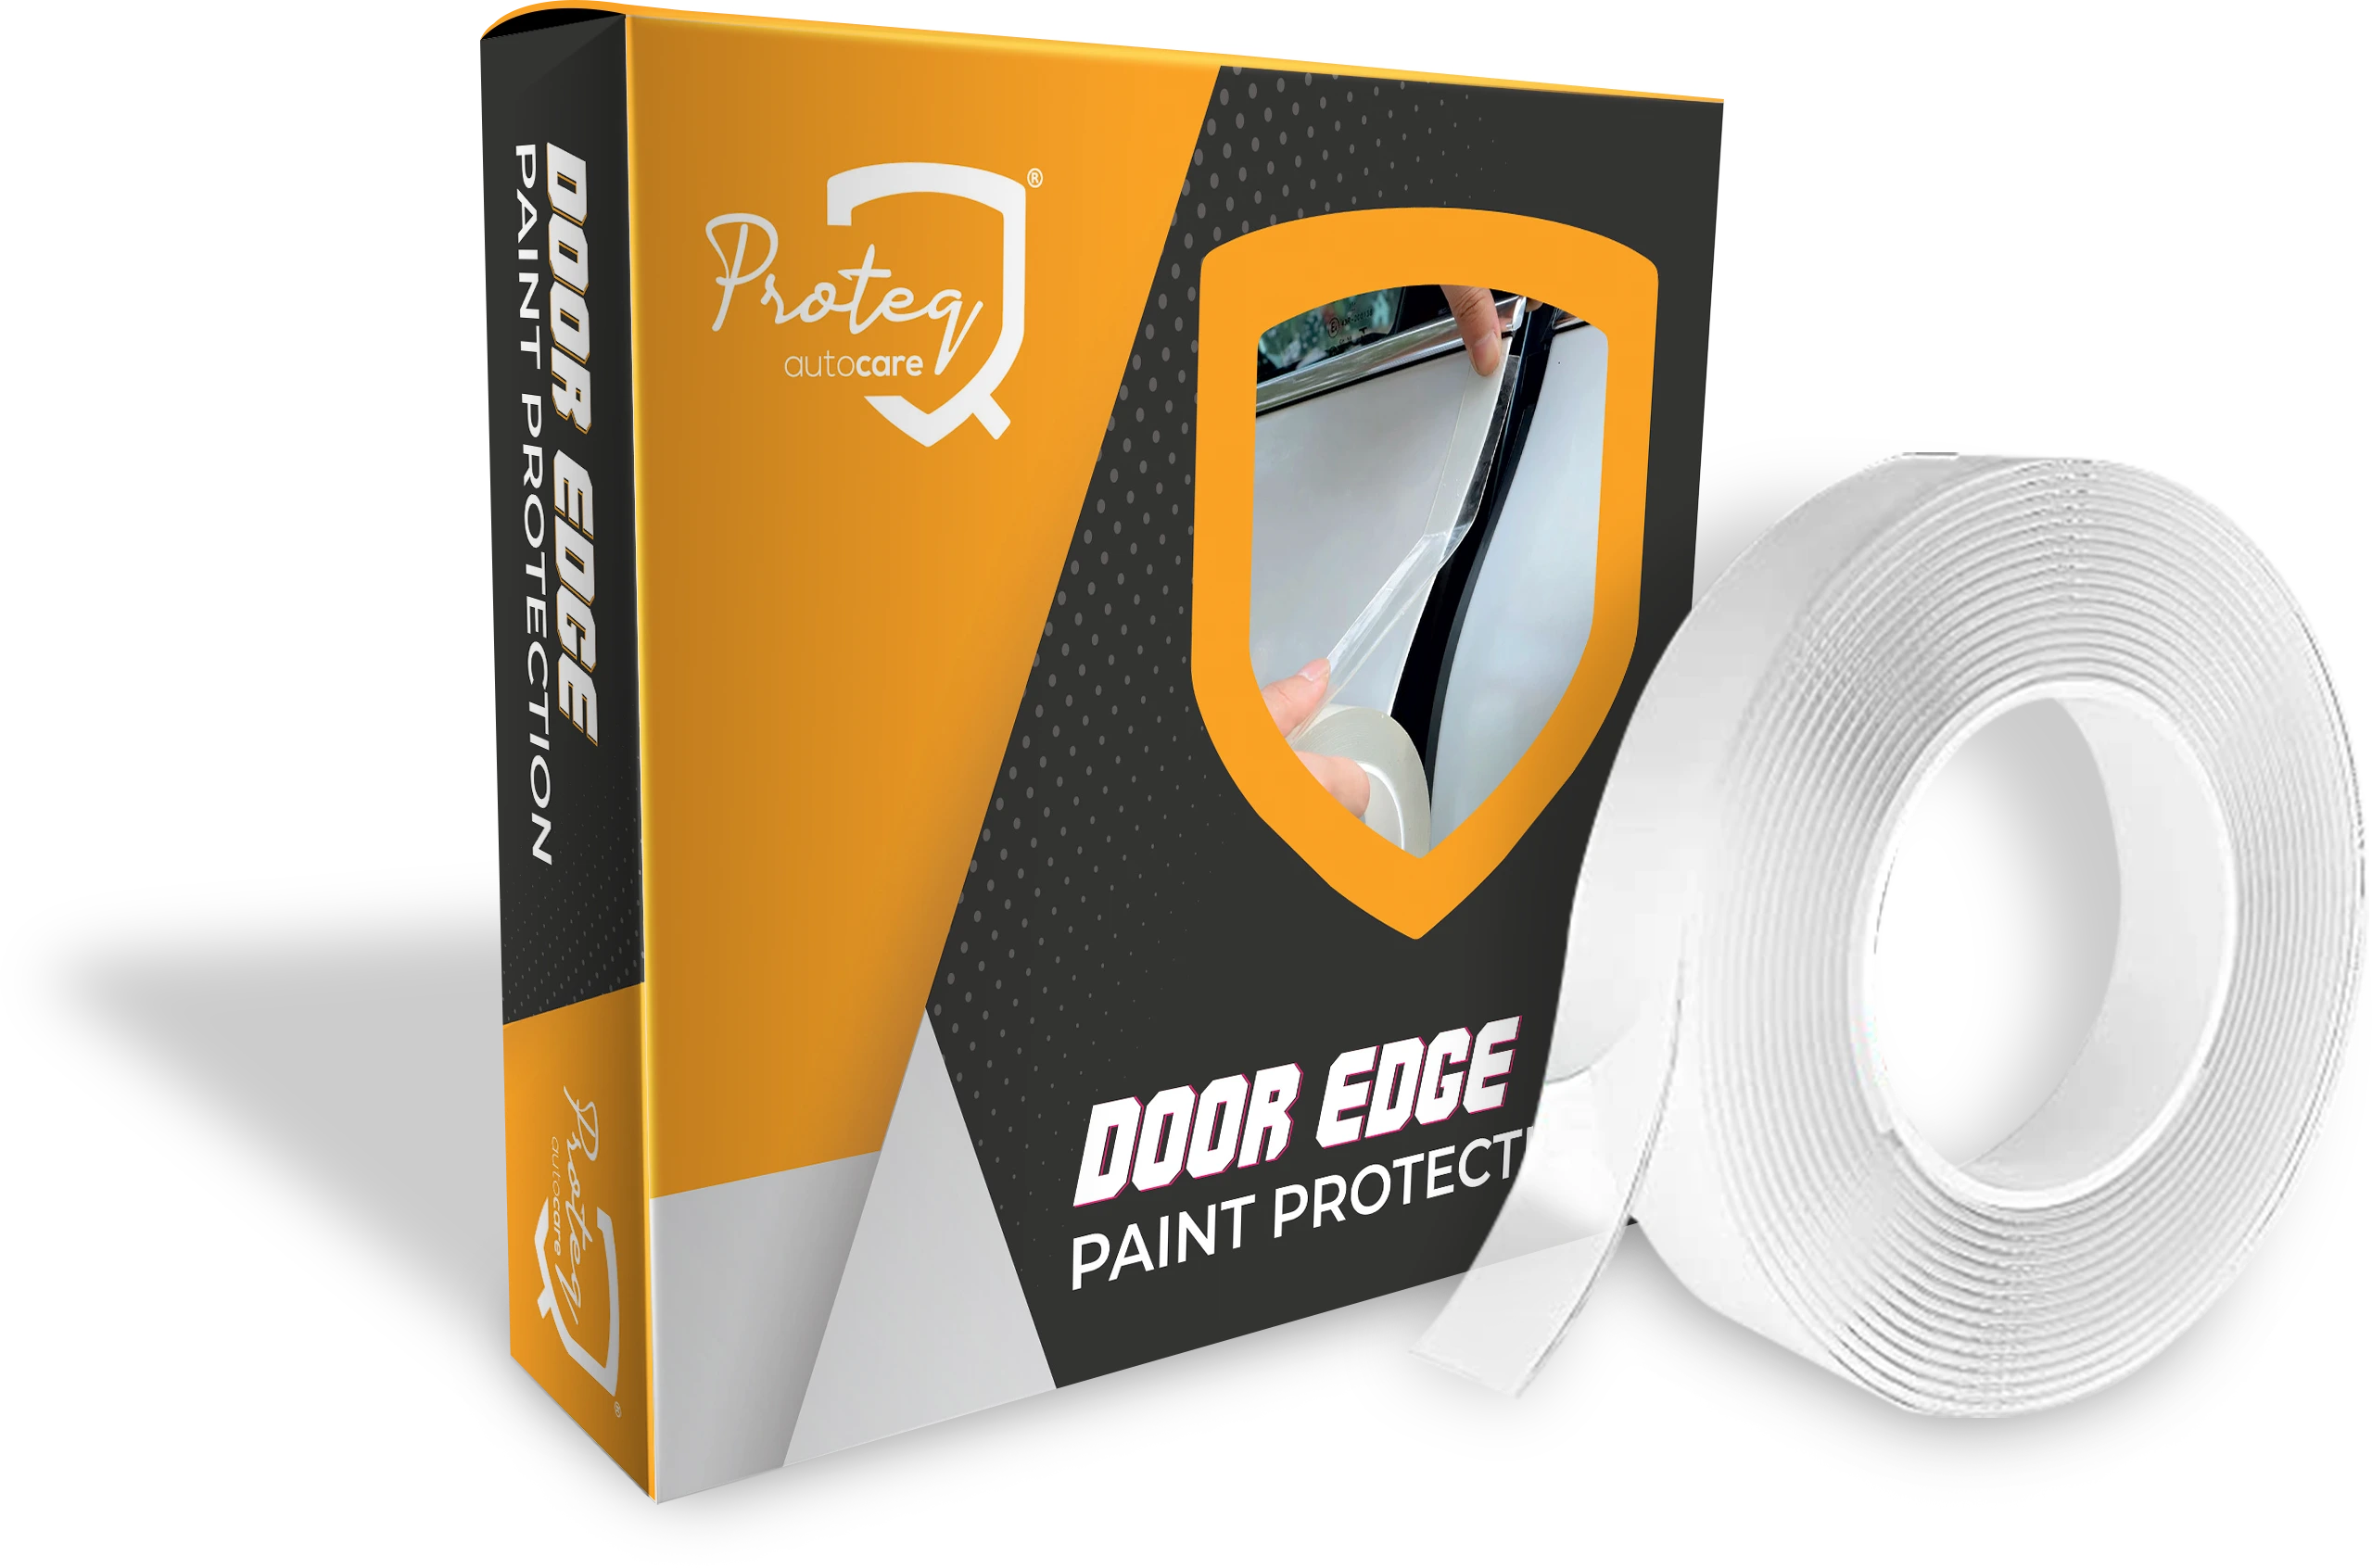 Proteq Paint Protection Film 3.0 Series